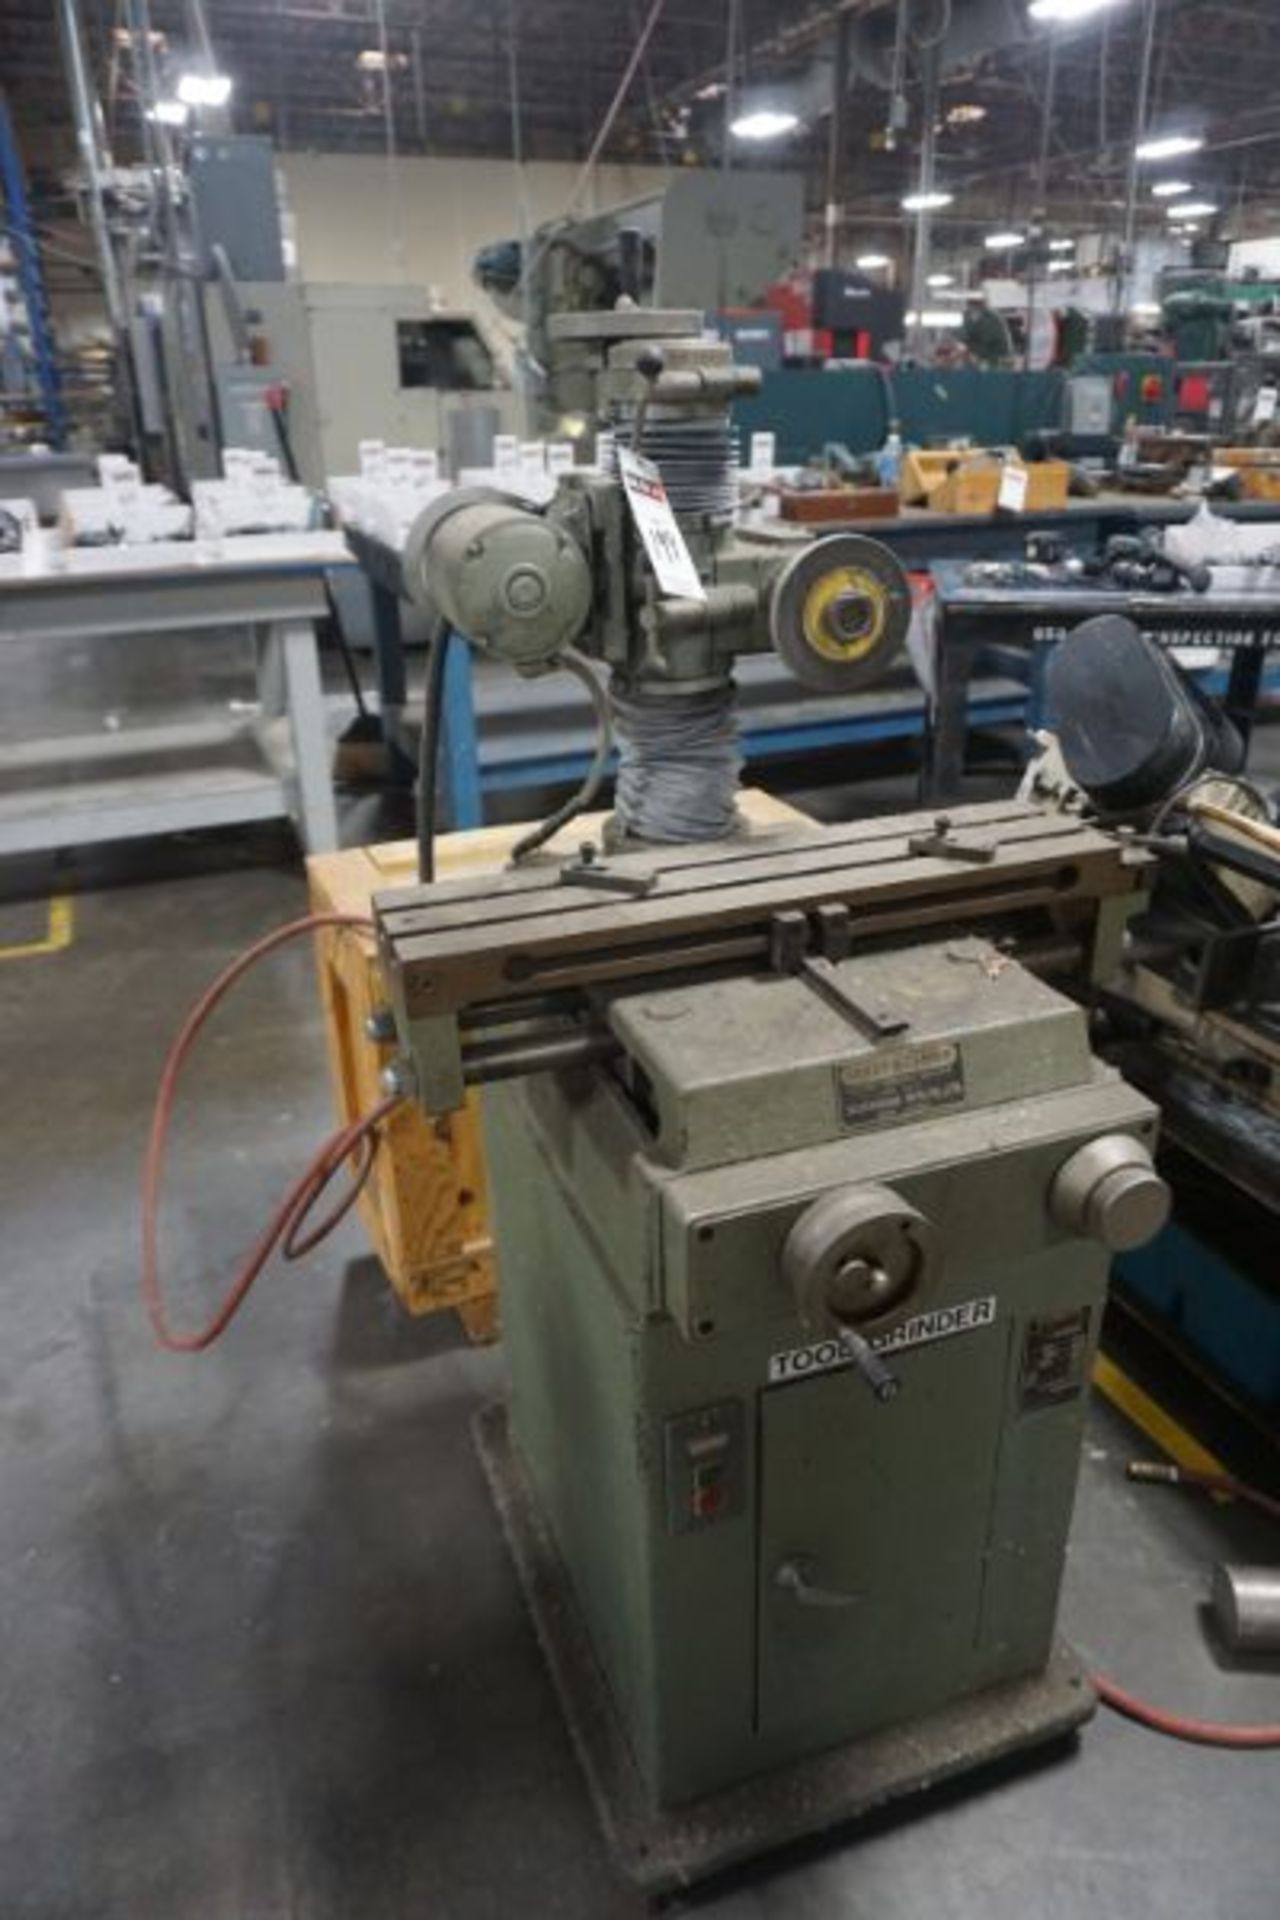 Great Captain CG-7 Tool Cutter Grinder, s/n 525 - Image 2 of 4